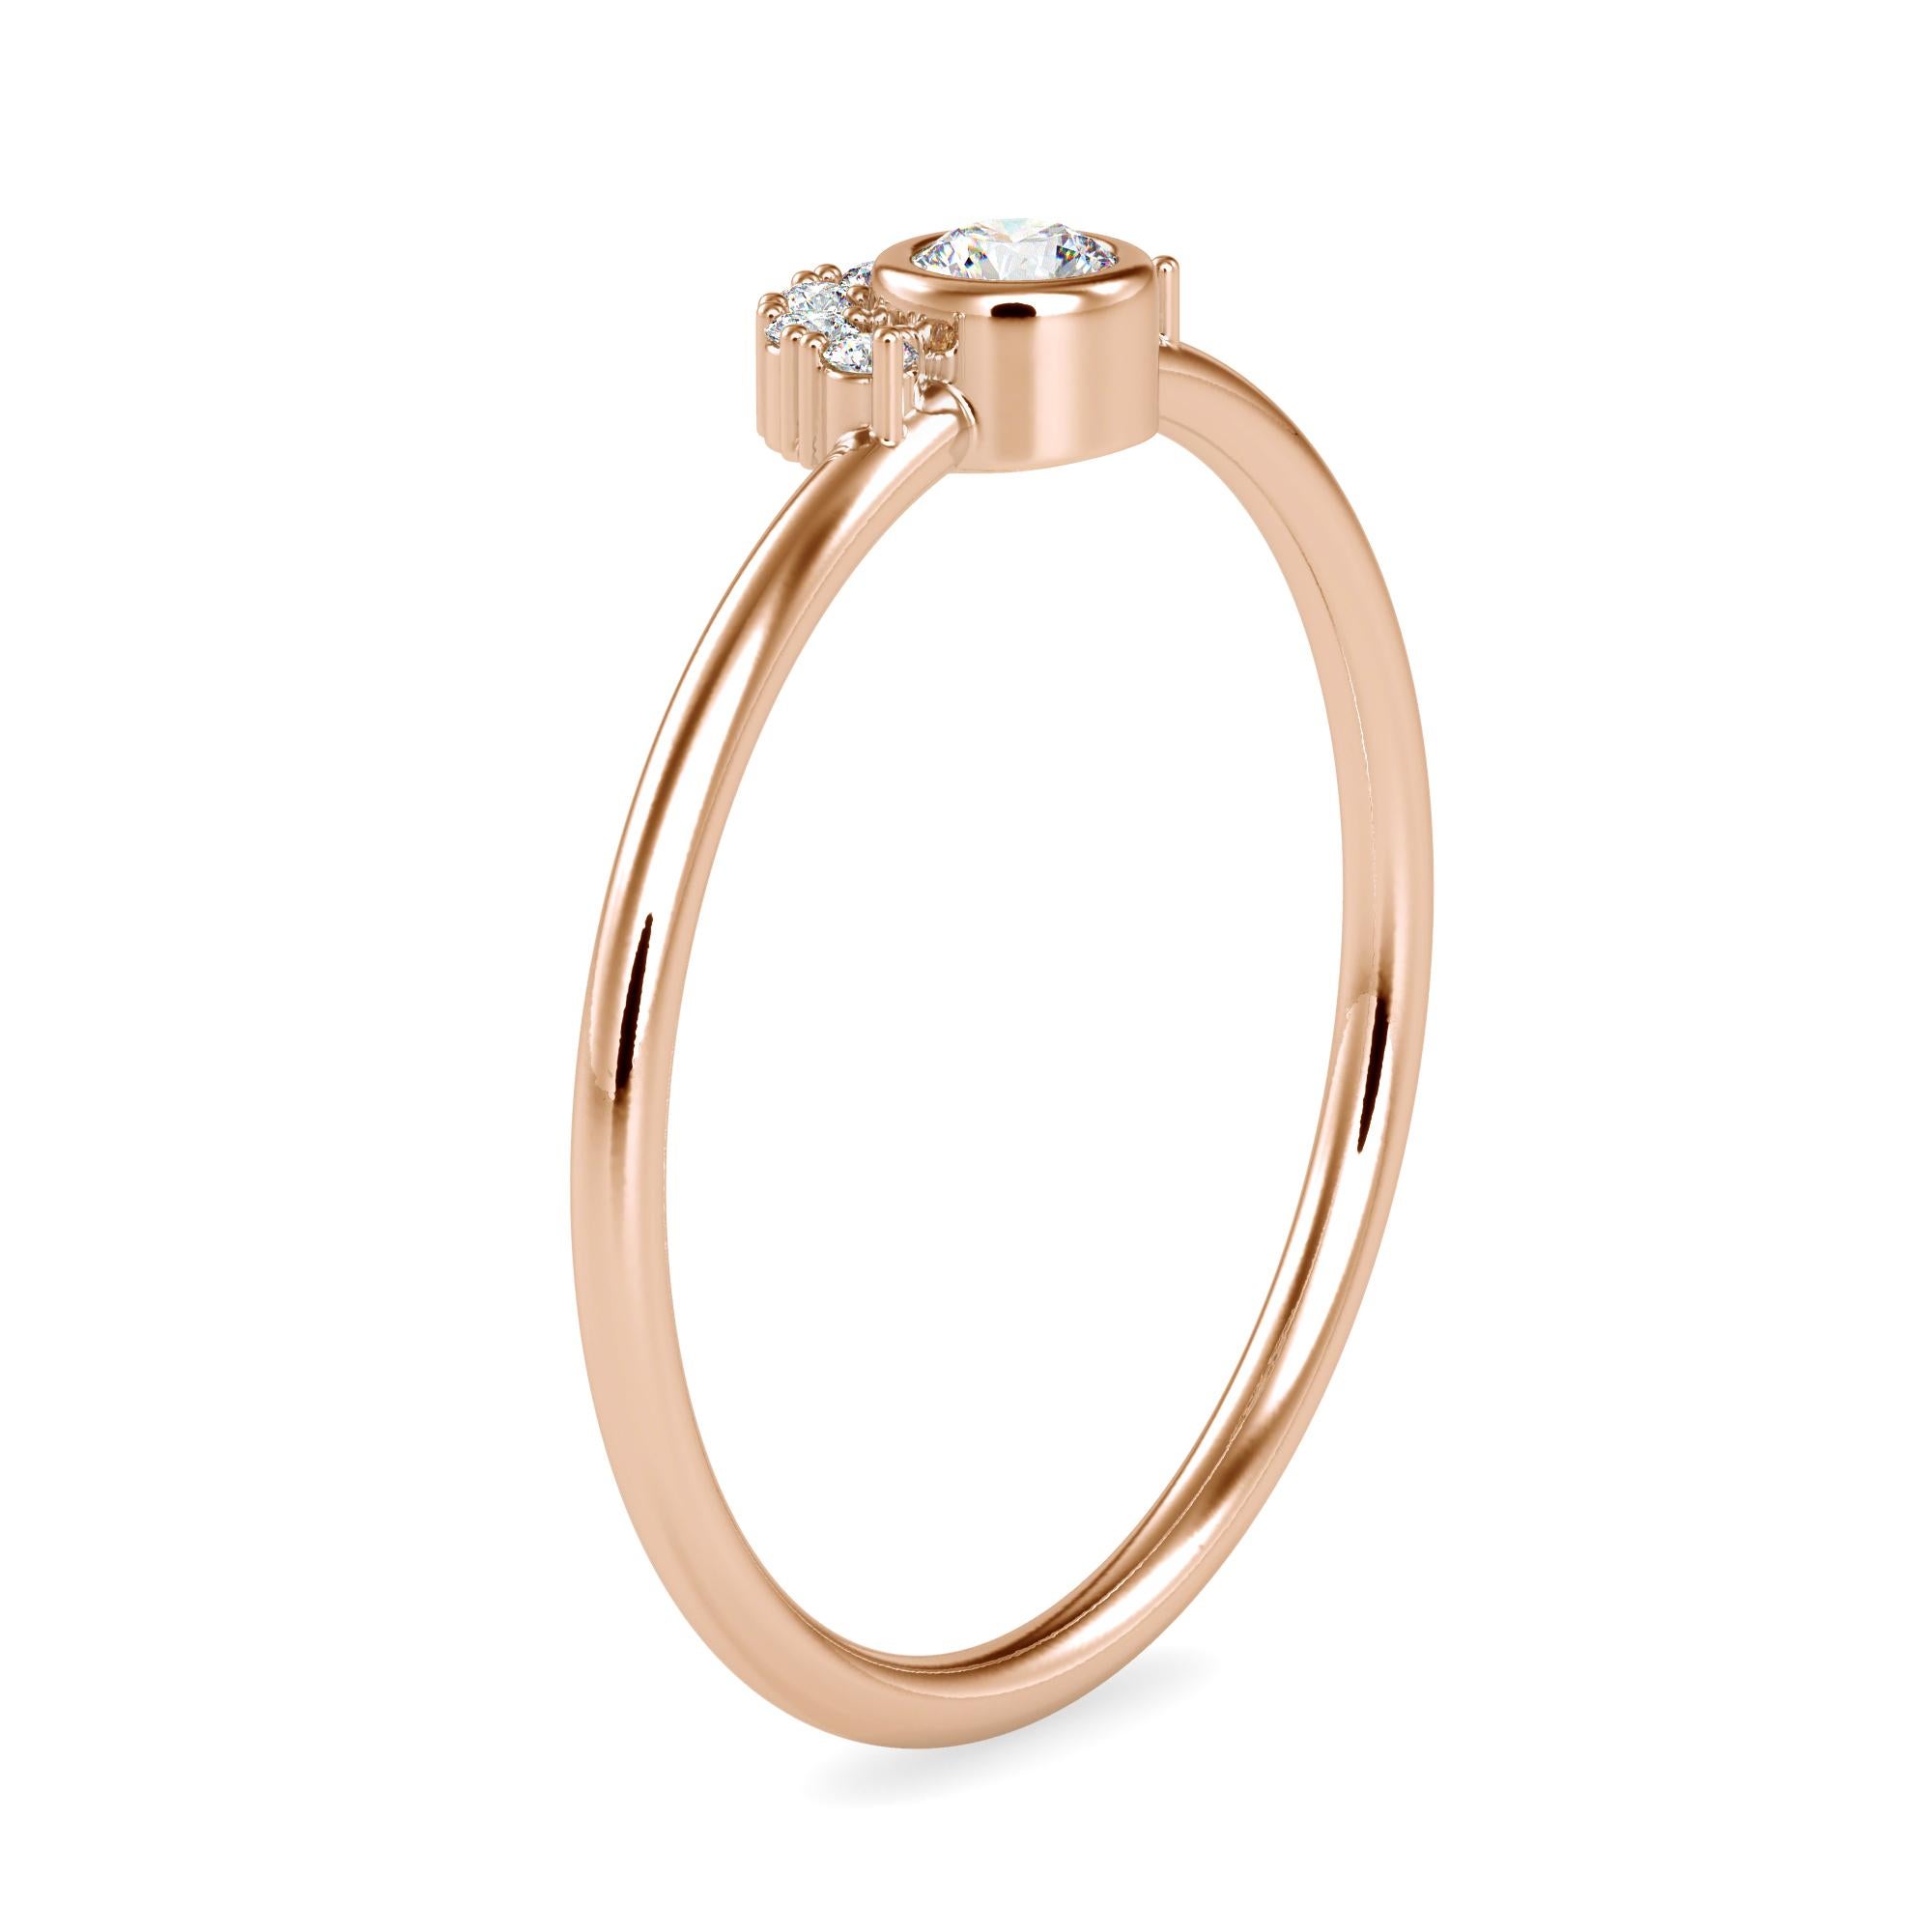 0.13 Carat Diamond 14K Rose Gold Ring In New Condition For Sale In Los Angeles, CA